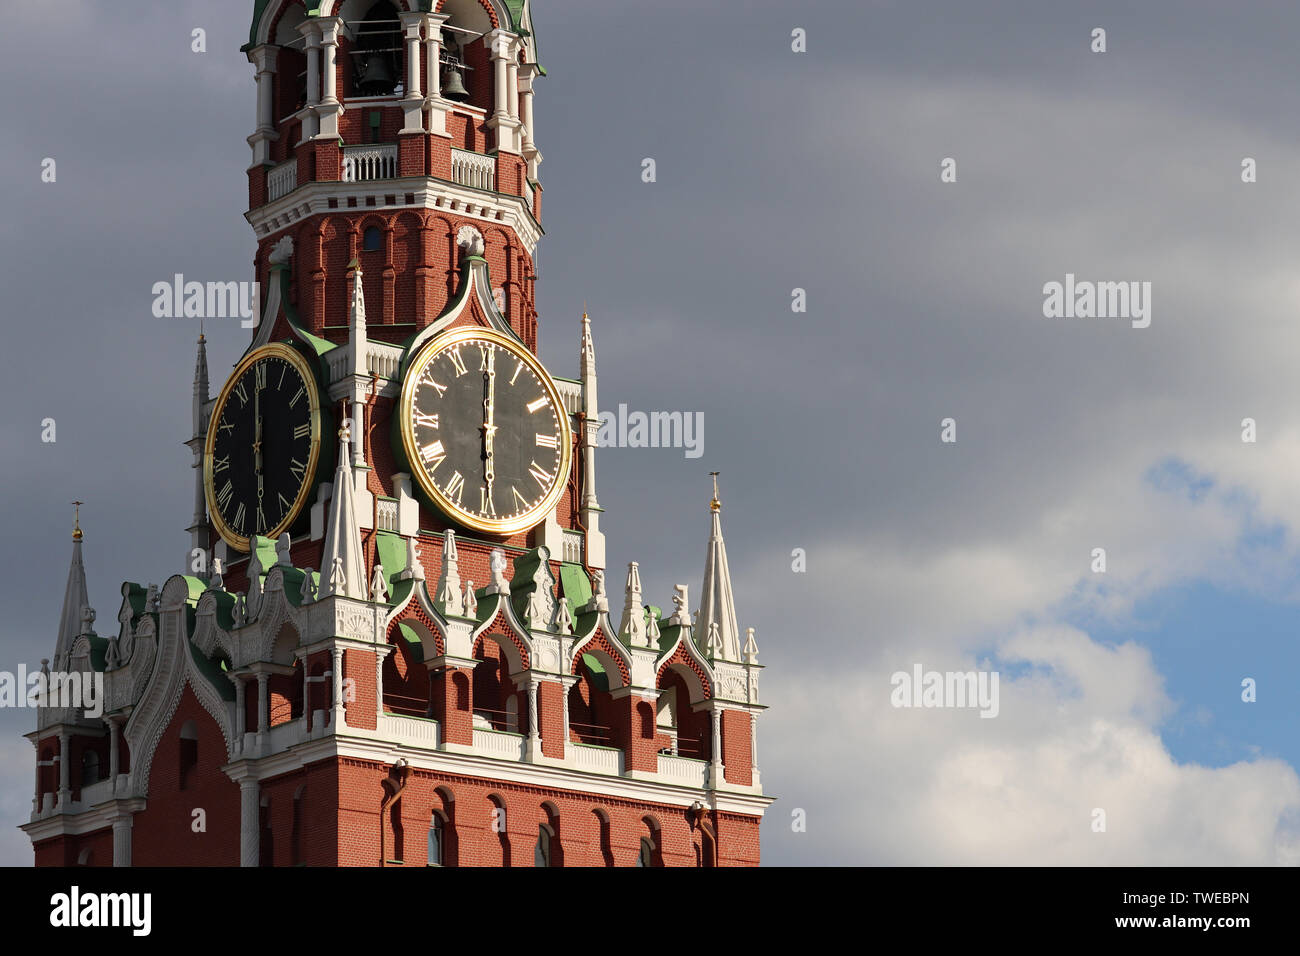 Chimes of Spasskaya tower, symbol of Russia on Red Square. Moscow Kremlin tower clock against dramatic sky with clouds, time concept Stock Photo